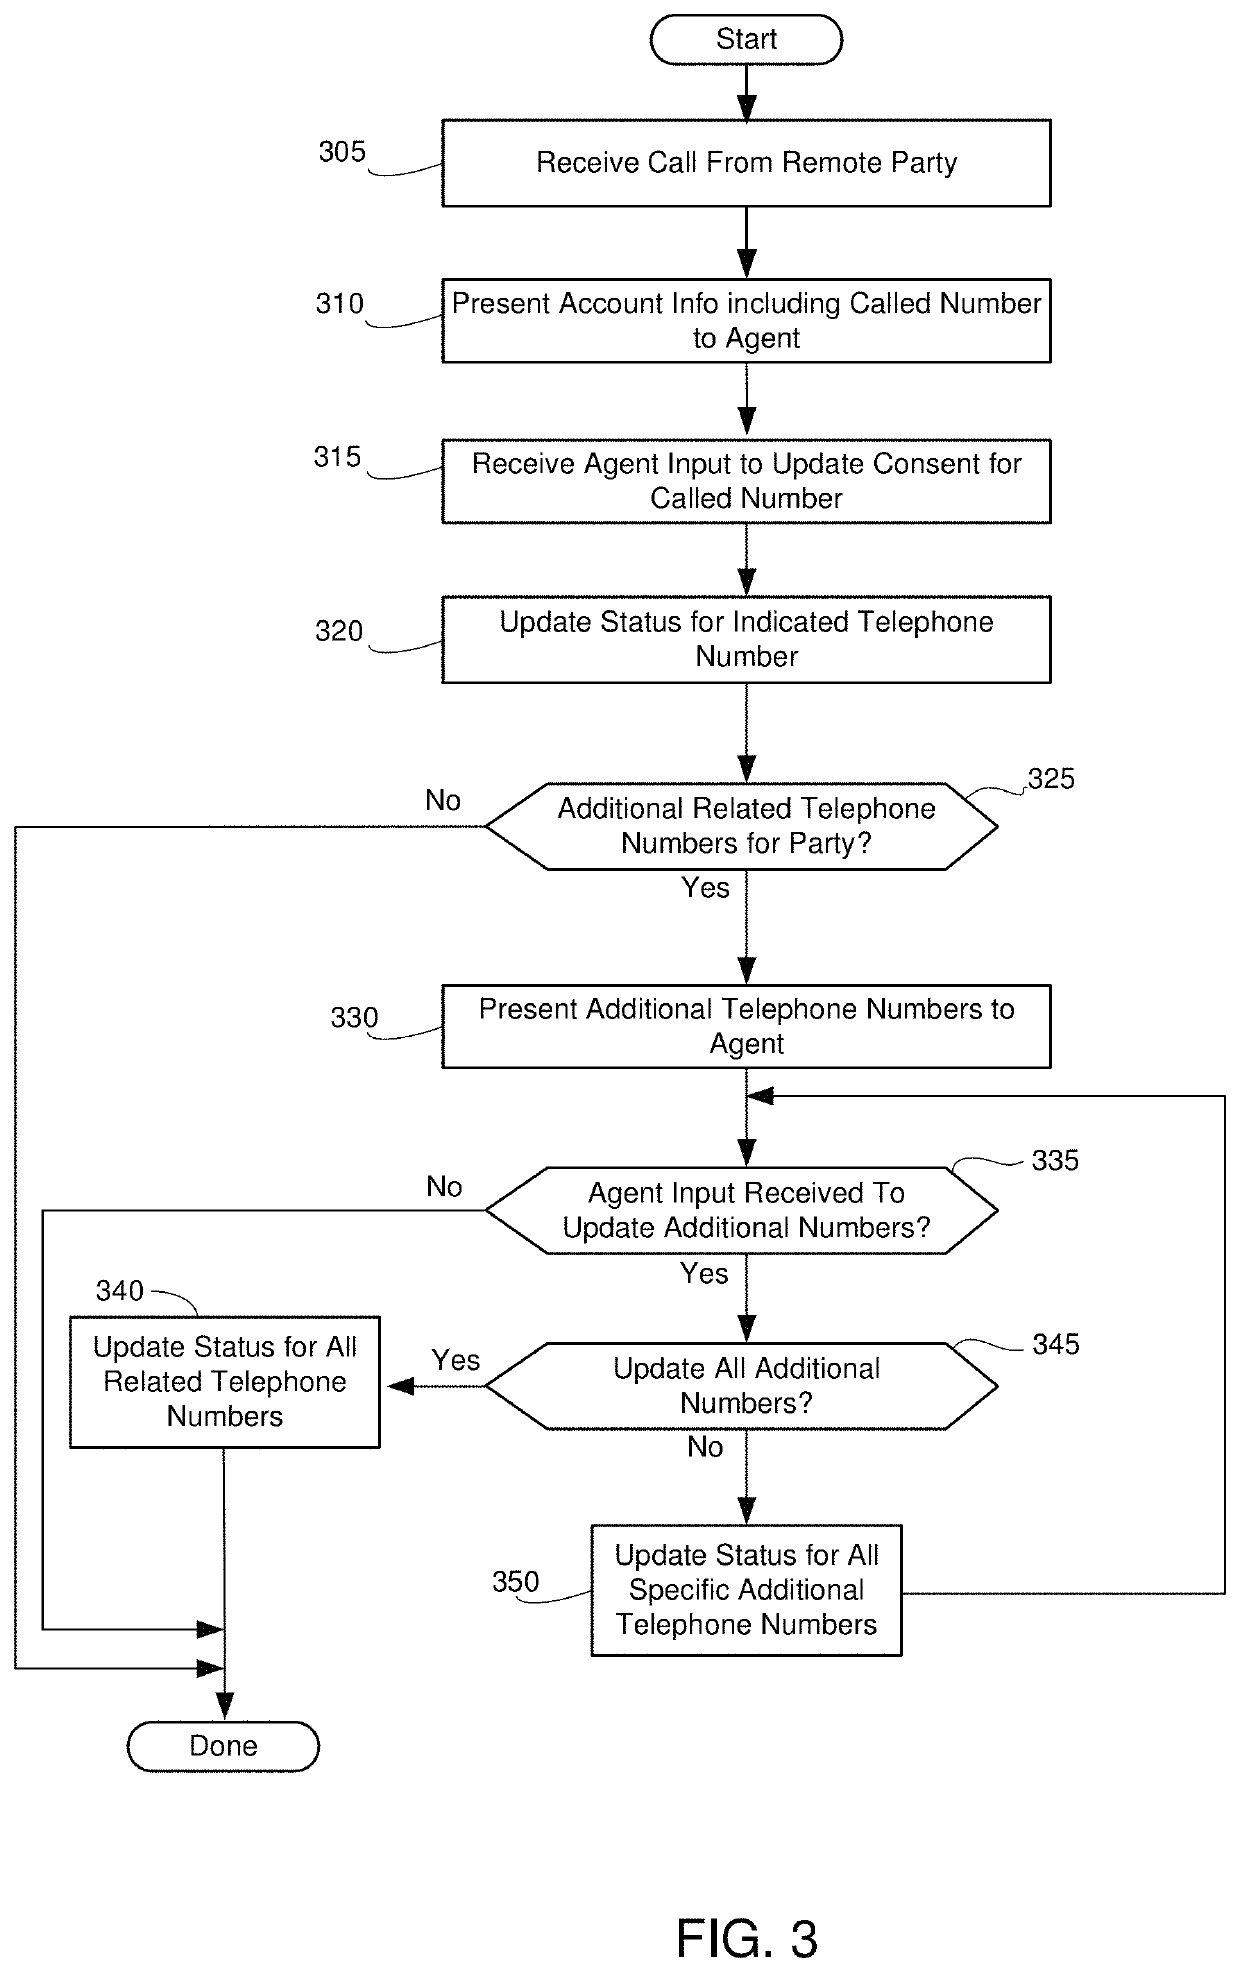 Facilitating agent management of consent for a party associated with multiple telephone numbers